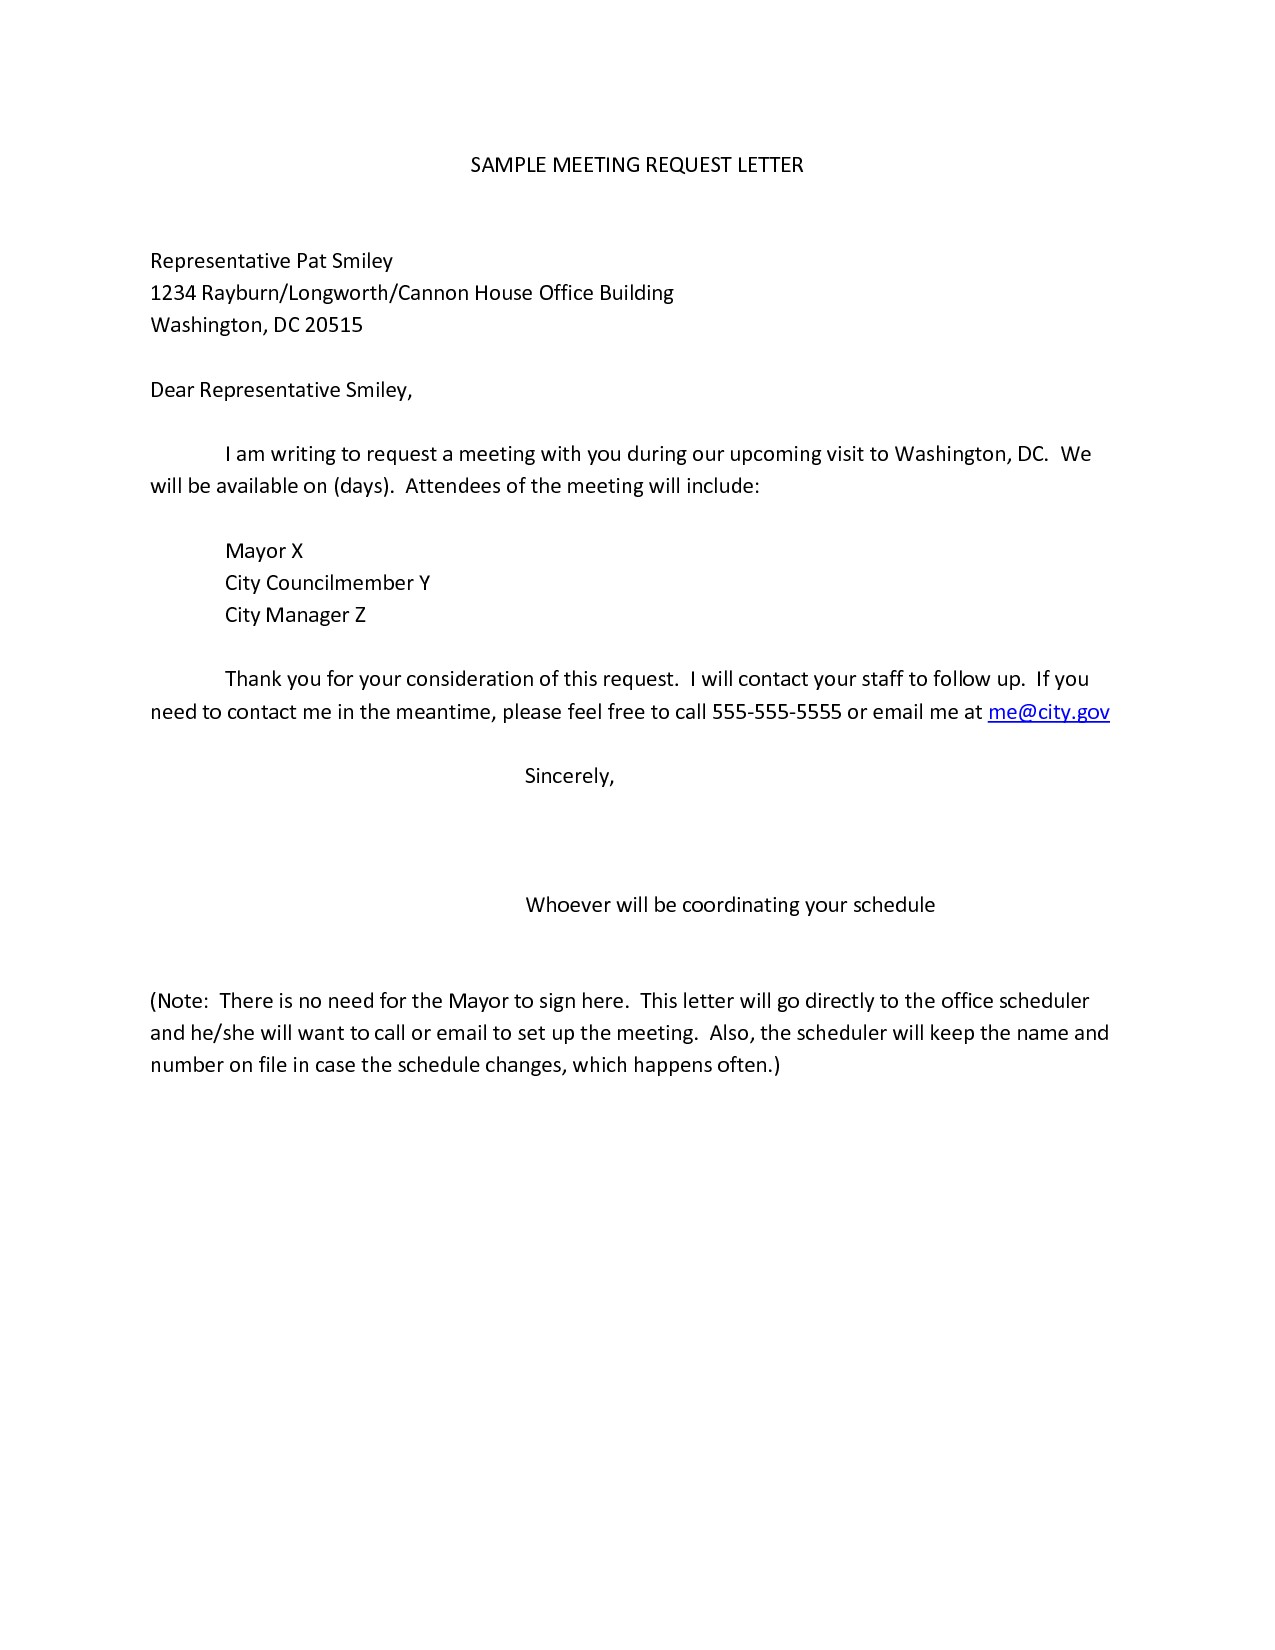 Sample Letter To Request A Meeting With Manager Scrumps Document Via Email